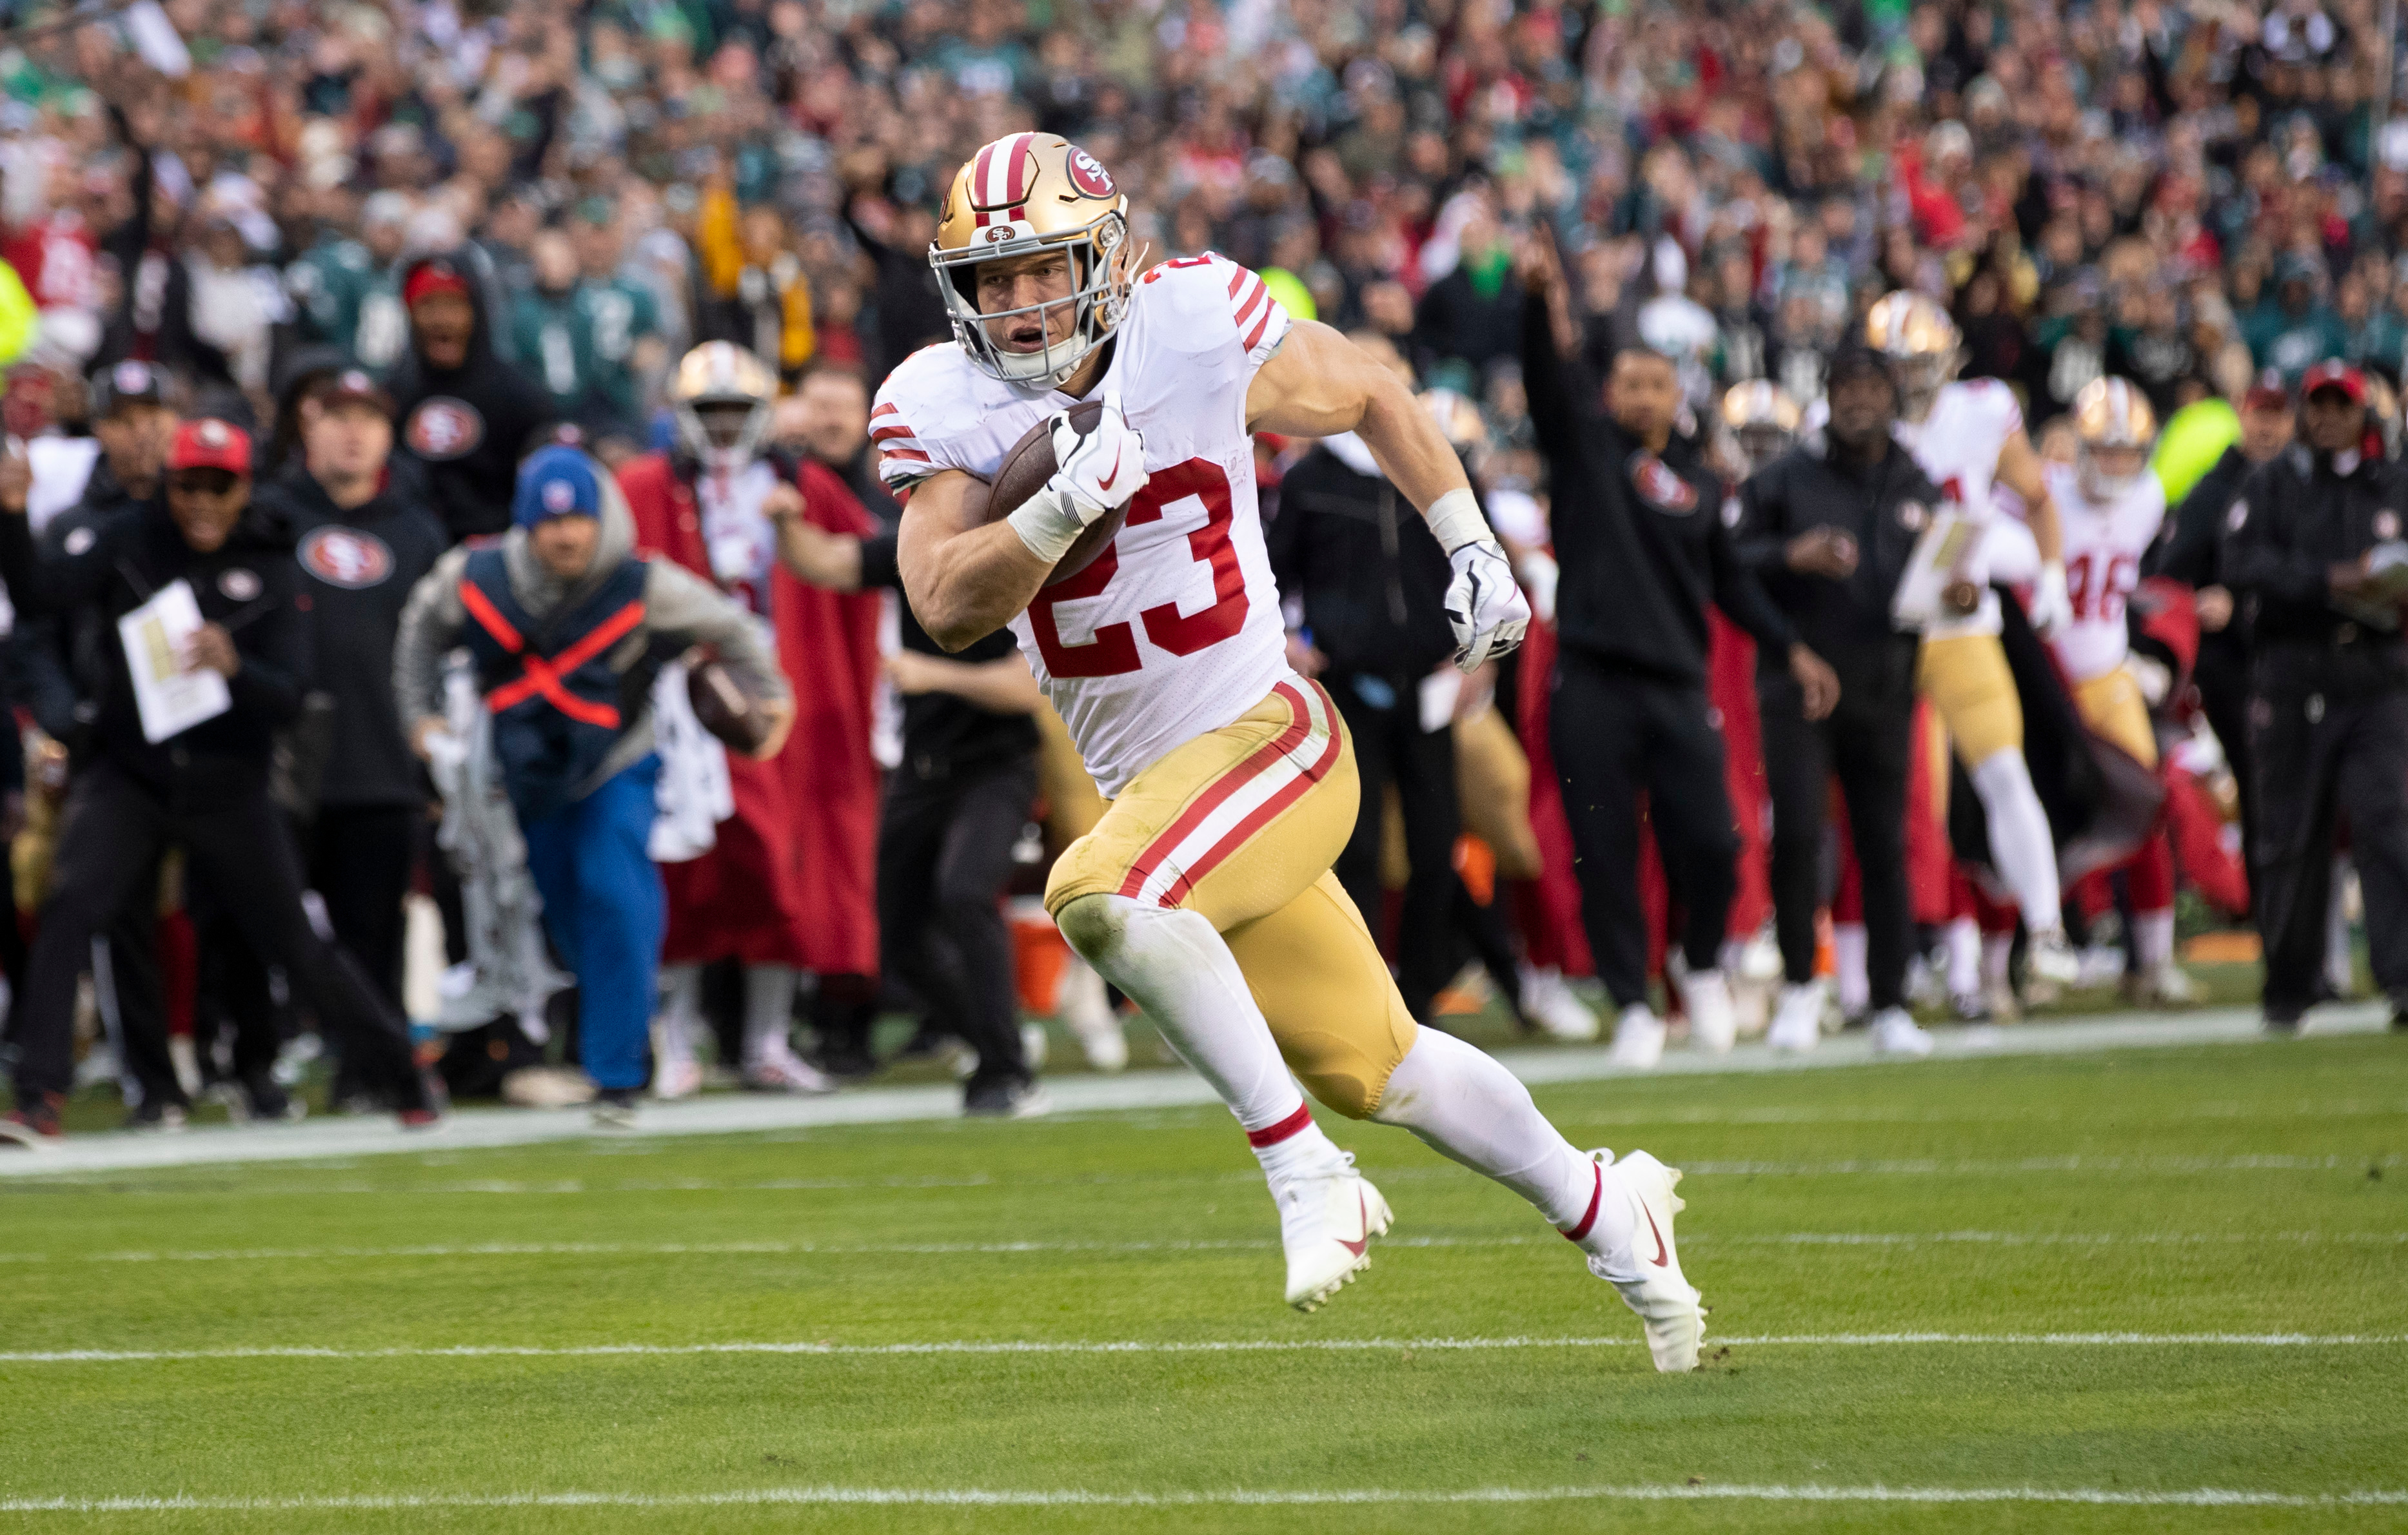 Christian McCaffrey #23 of the San Francisco 49ers rushes for a 23-yard touchdown during the NFC Championship playoff game against the Philadelphia Eagles at Lincoln Financial Field on January 29, 2023 in Philadelphia, Pennsylvania. The Eagles defeated the 49ers 31-7.